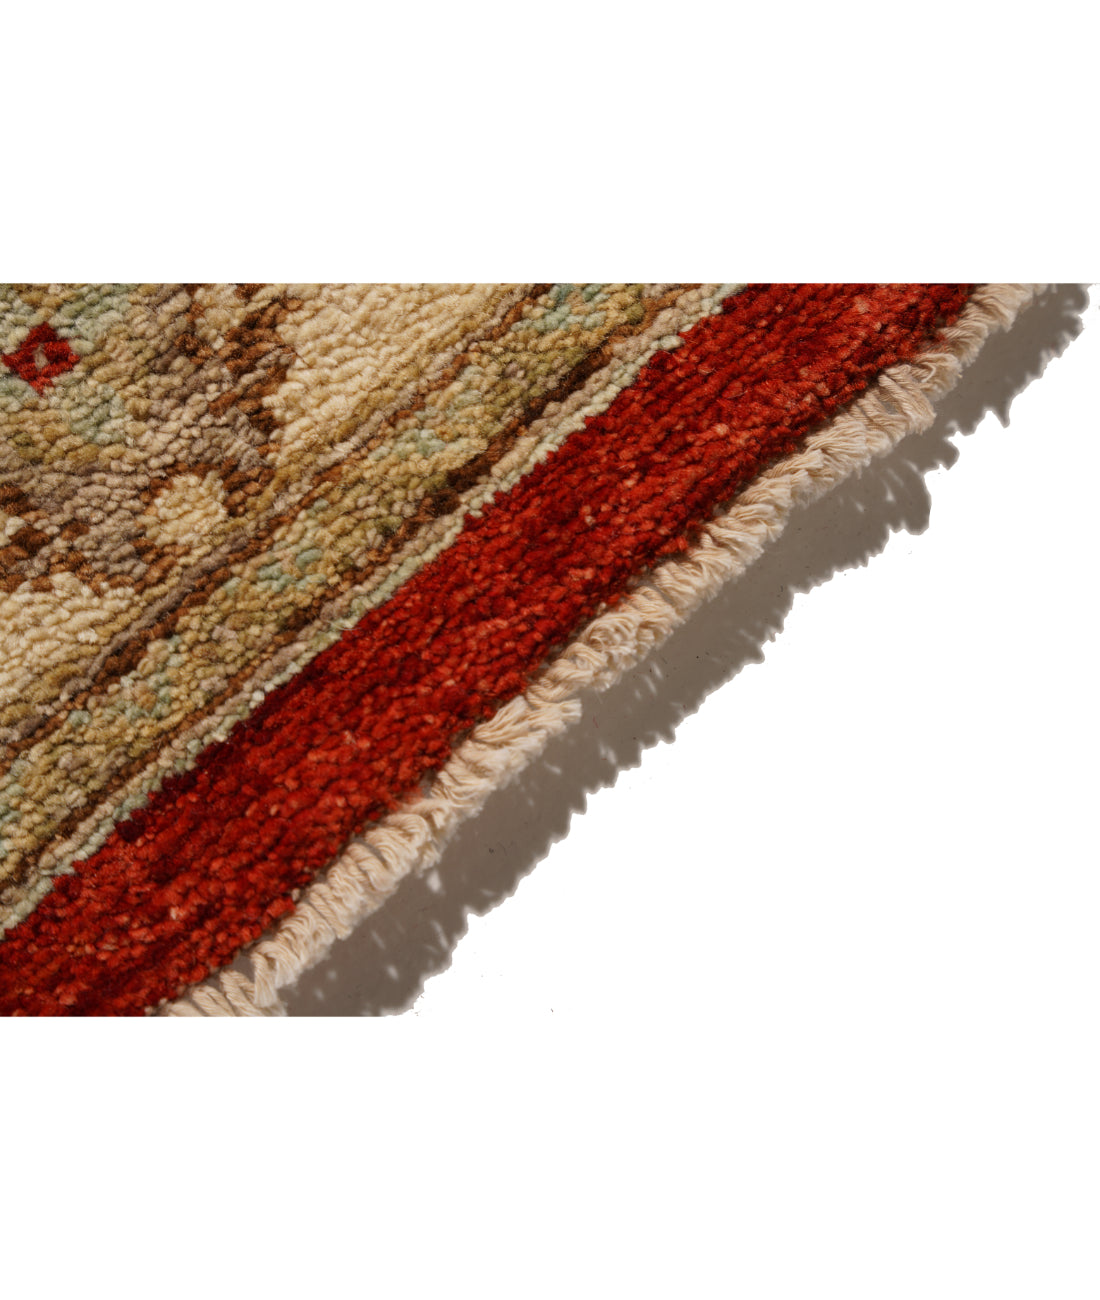 Hand Knotted Ziegler Farhan Wool Rug - 2'7'' x 15'2'' 2' 7" X 15' 2" (79 X 462) / Red / Ivory